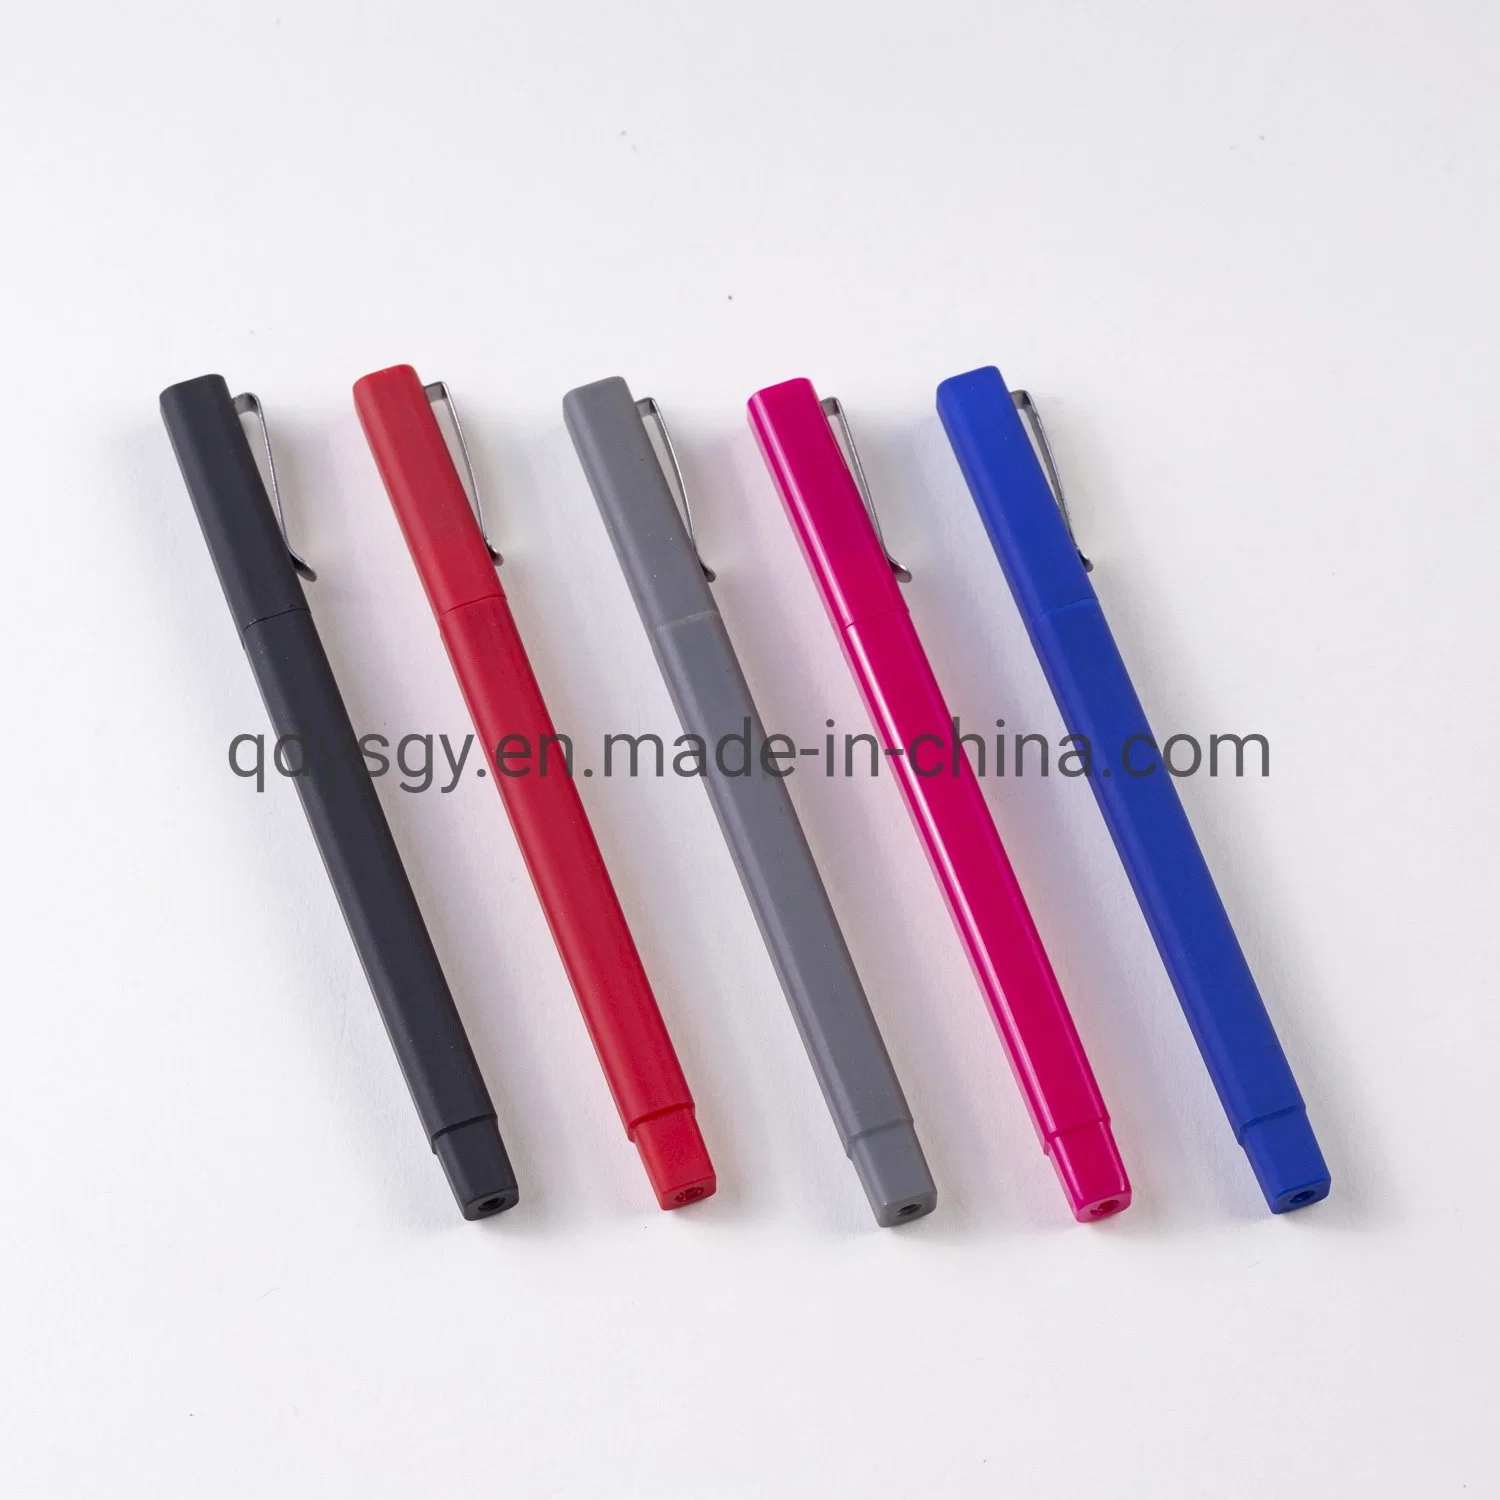 Promotional Gift Square Ball Pen